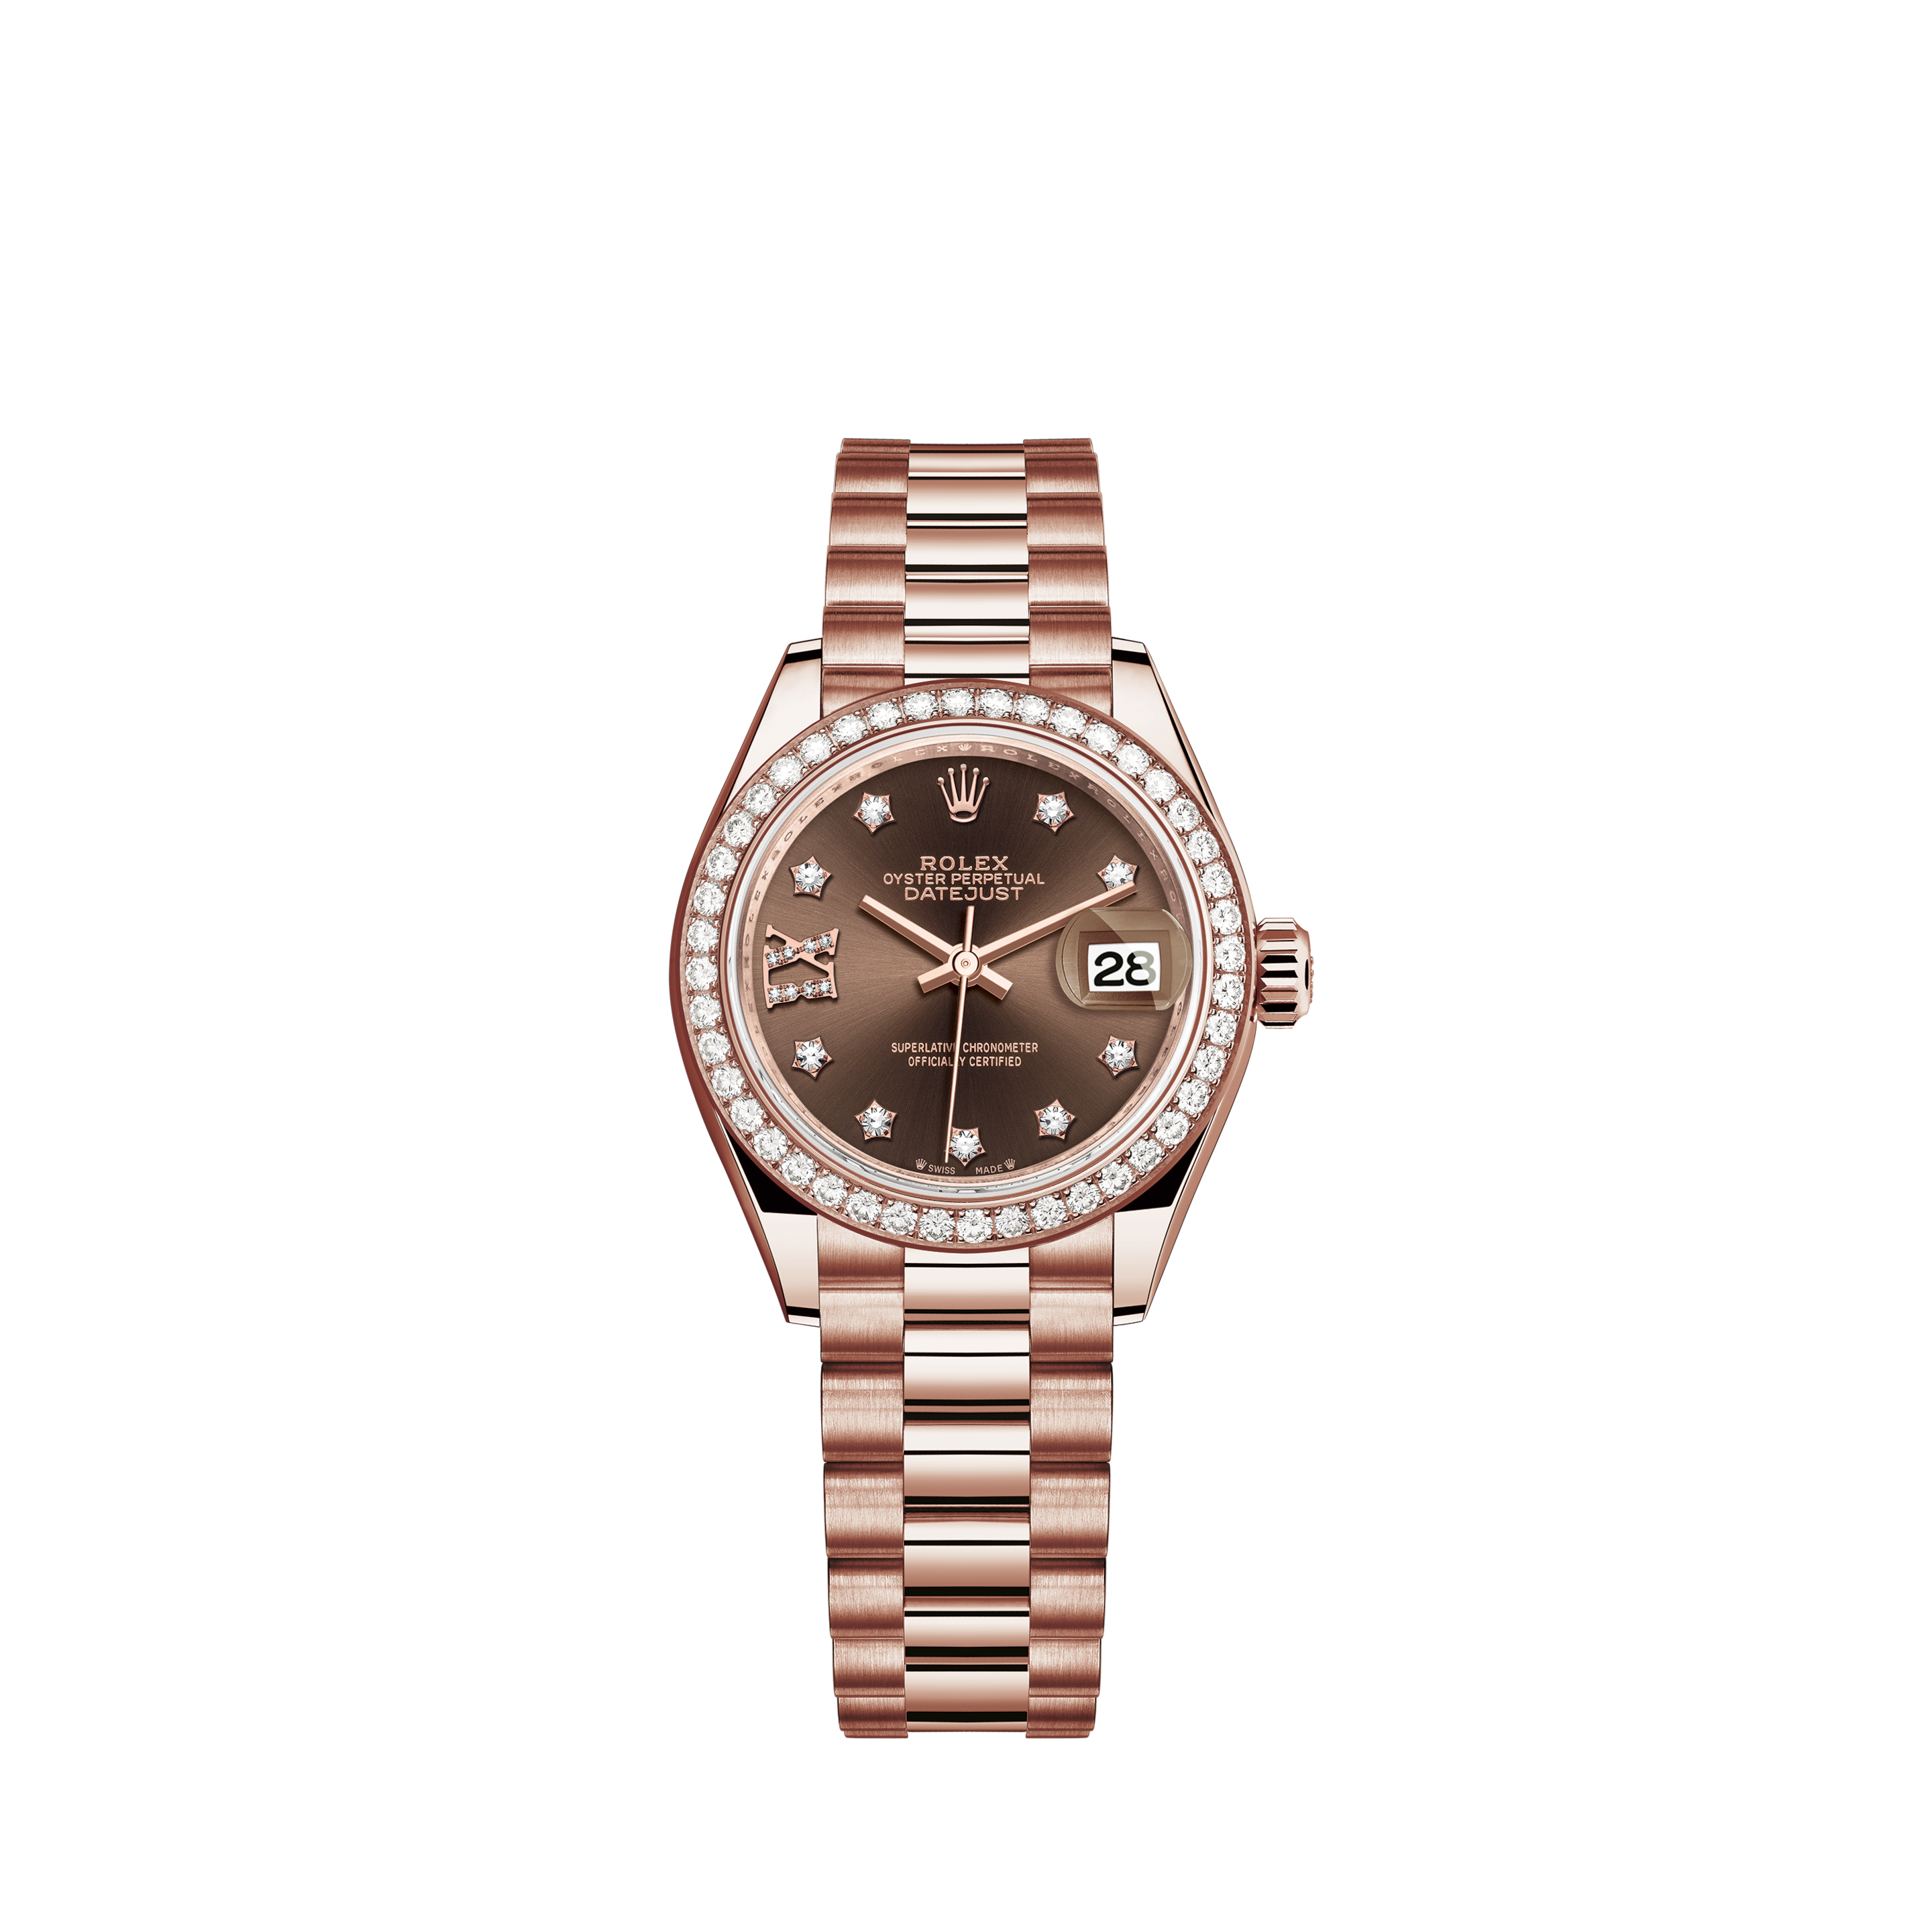 Rolex Datejust 26mm 69173 in Steel & 18ct Gold with Factory Jubilee Diamond Dial.